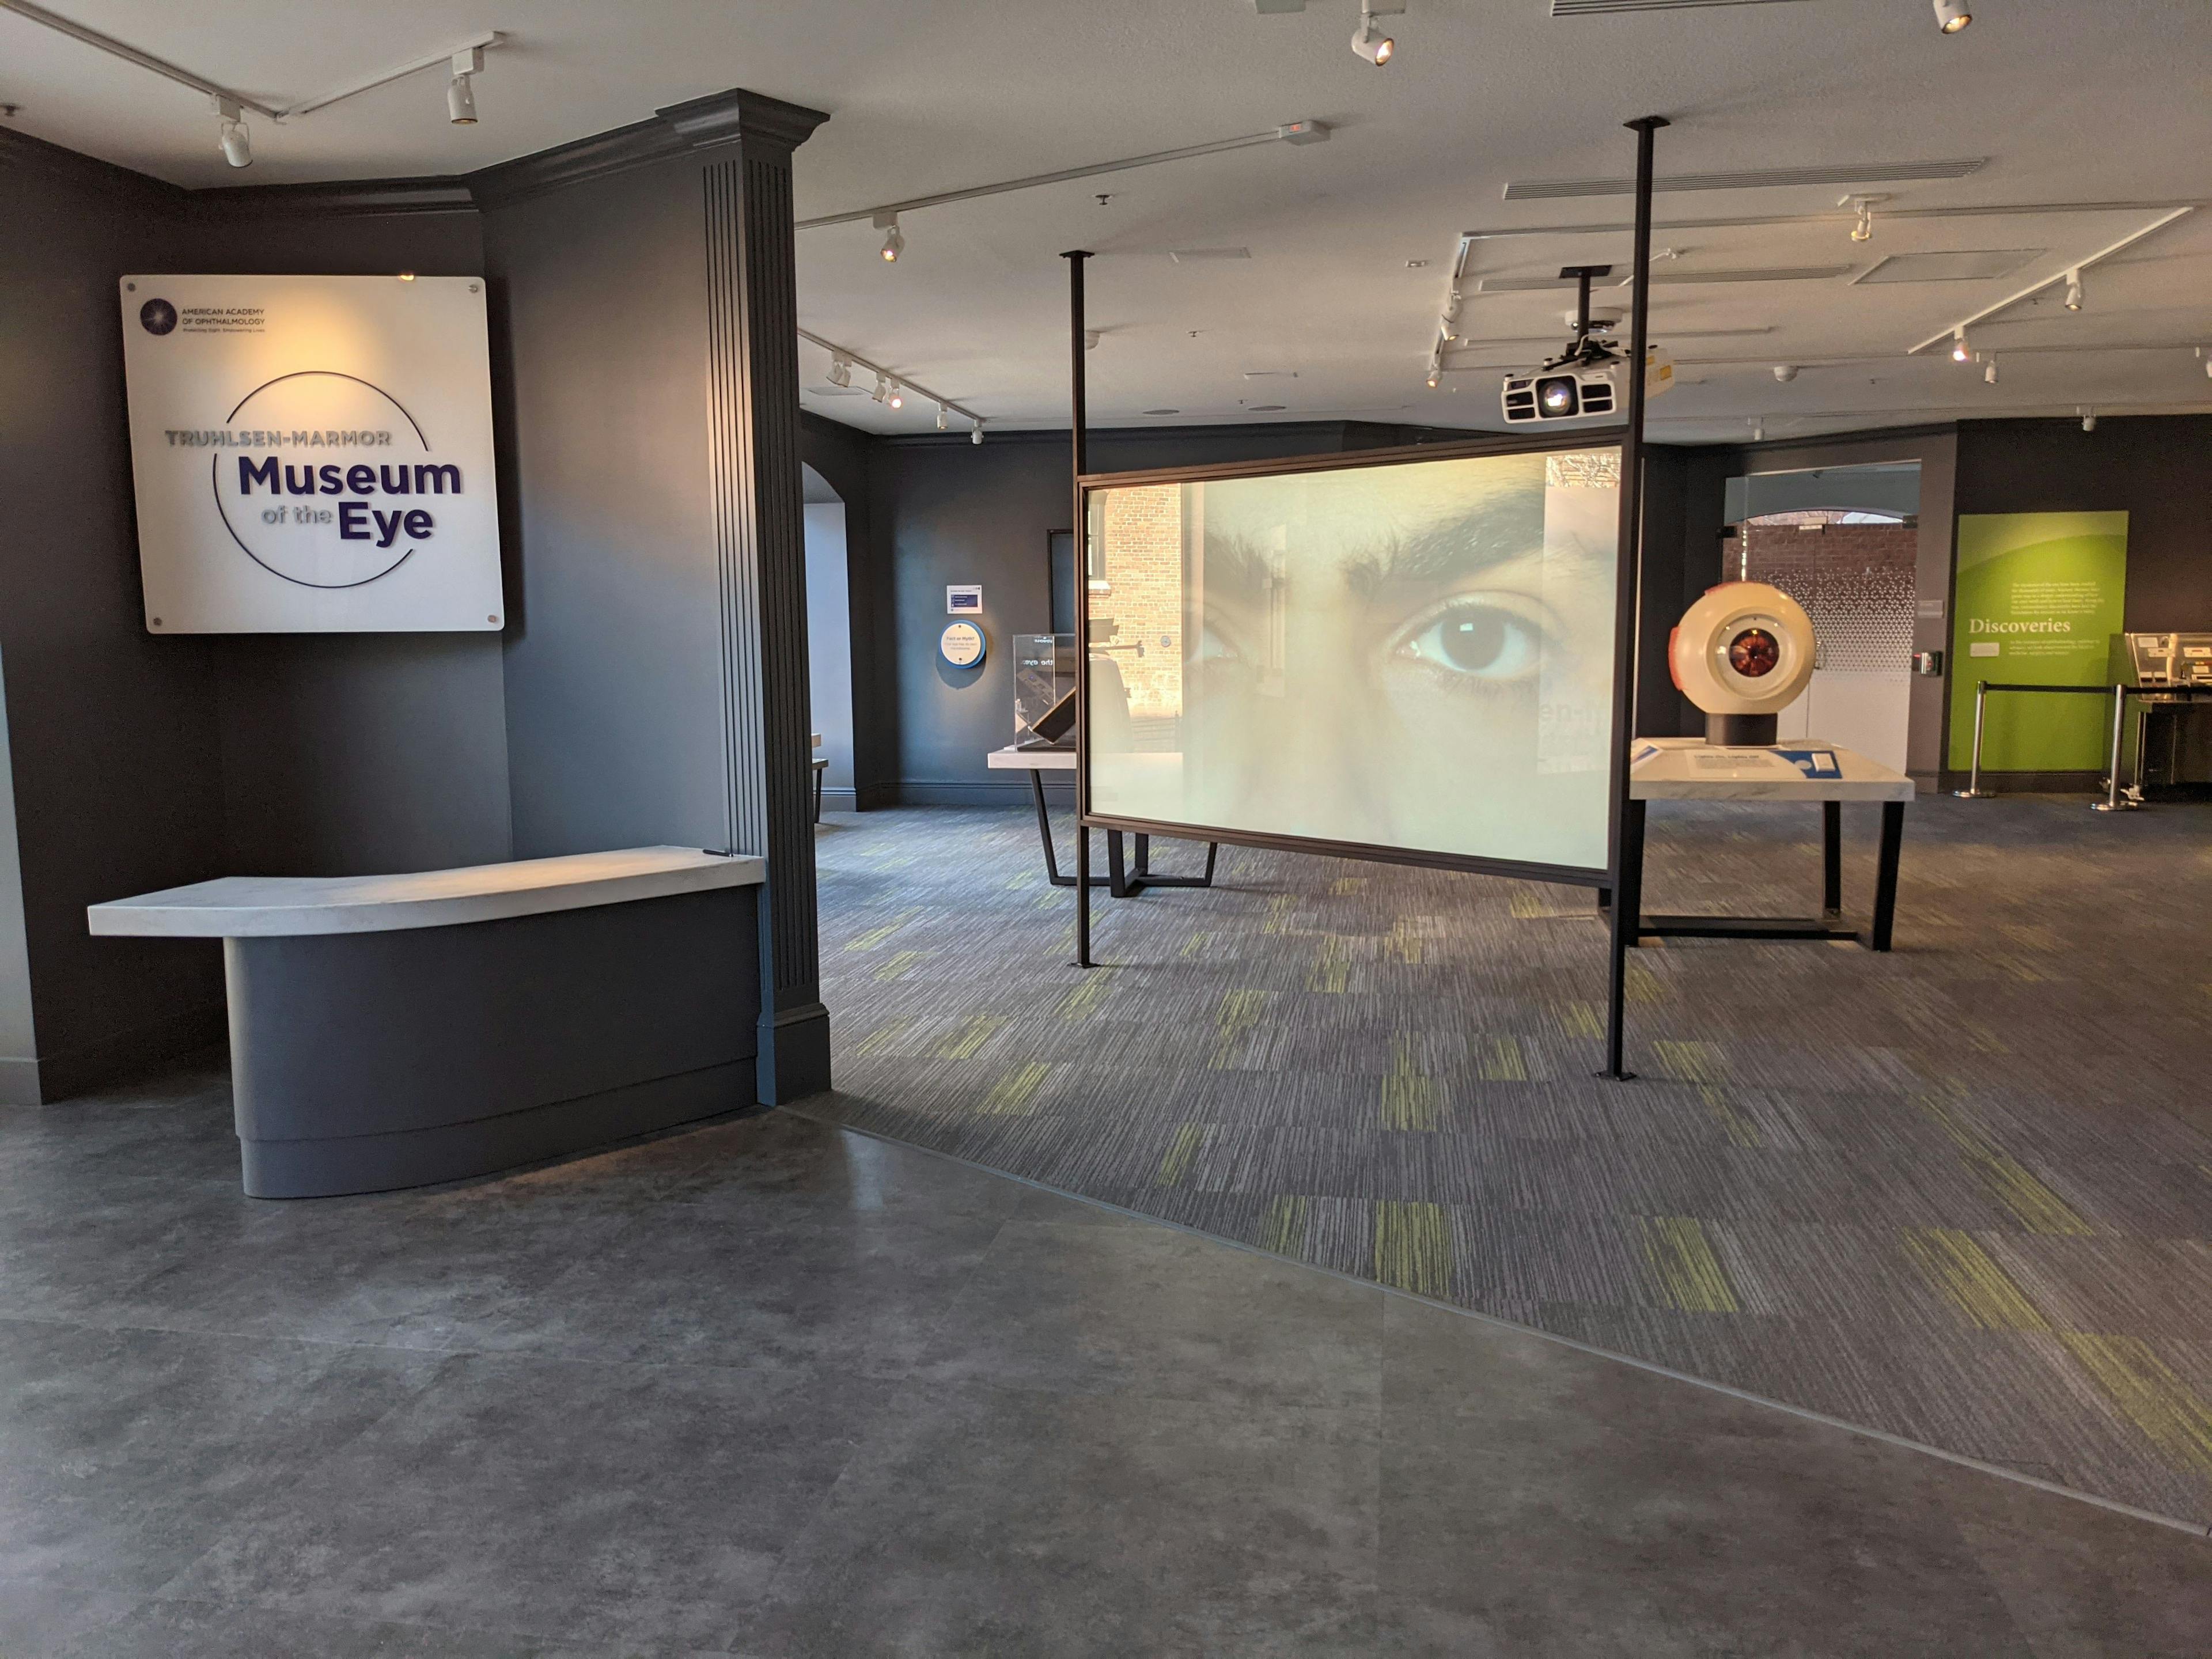 Visitors can check out a number of displays at the Museum of the Eye.